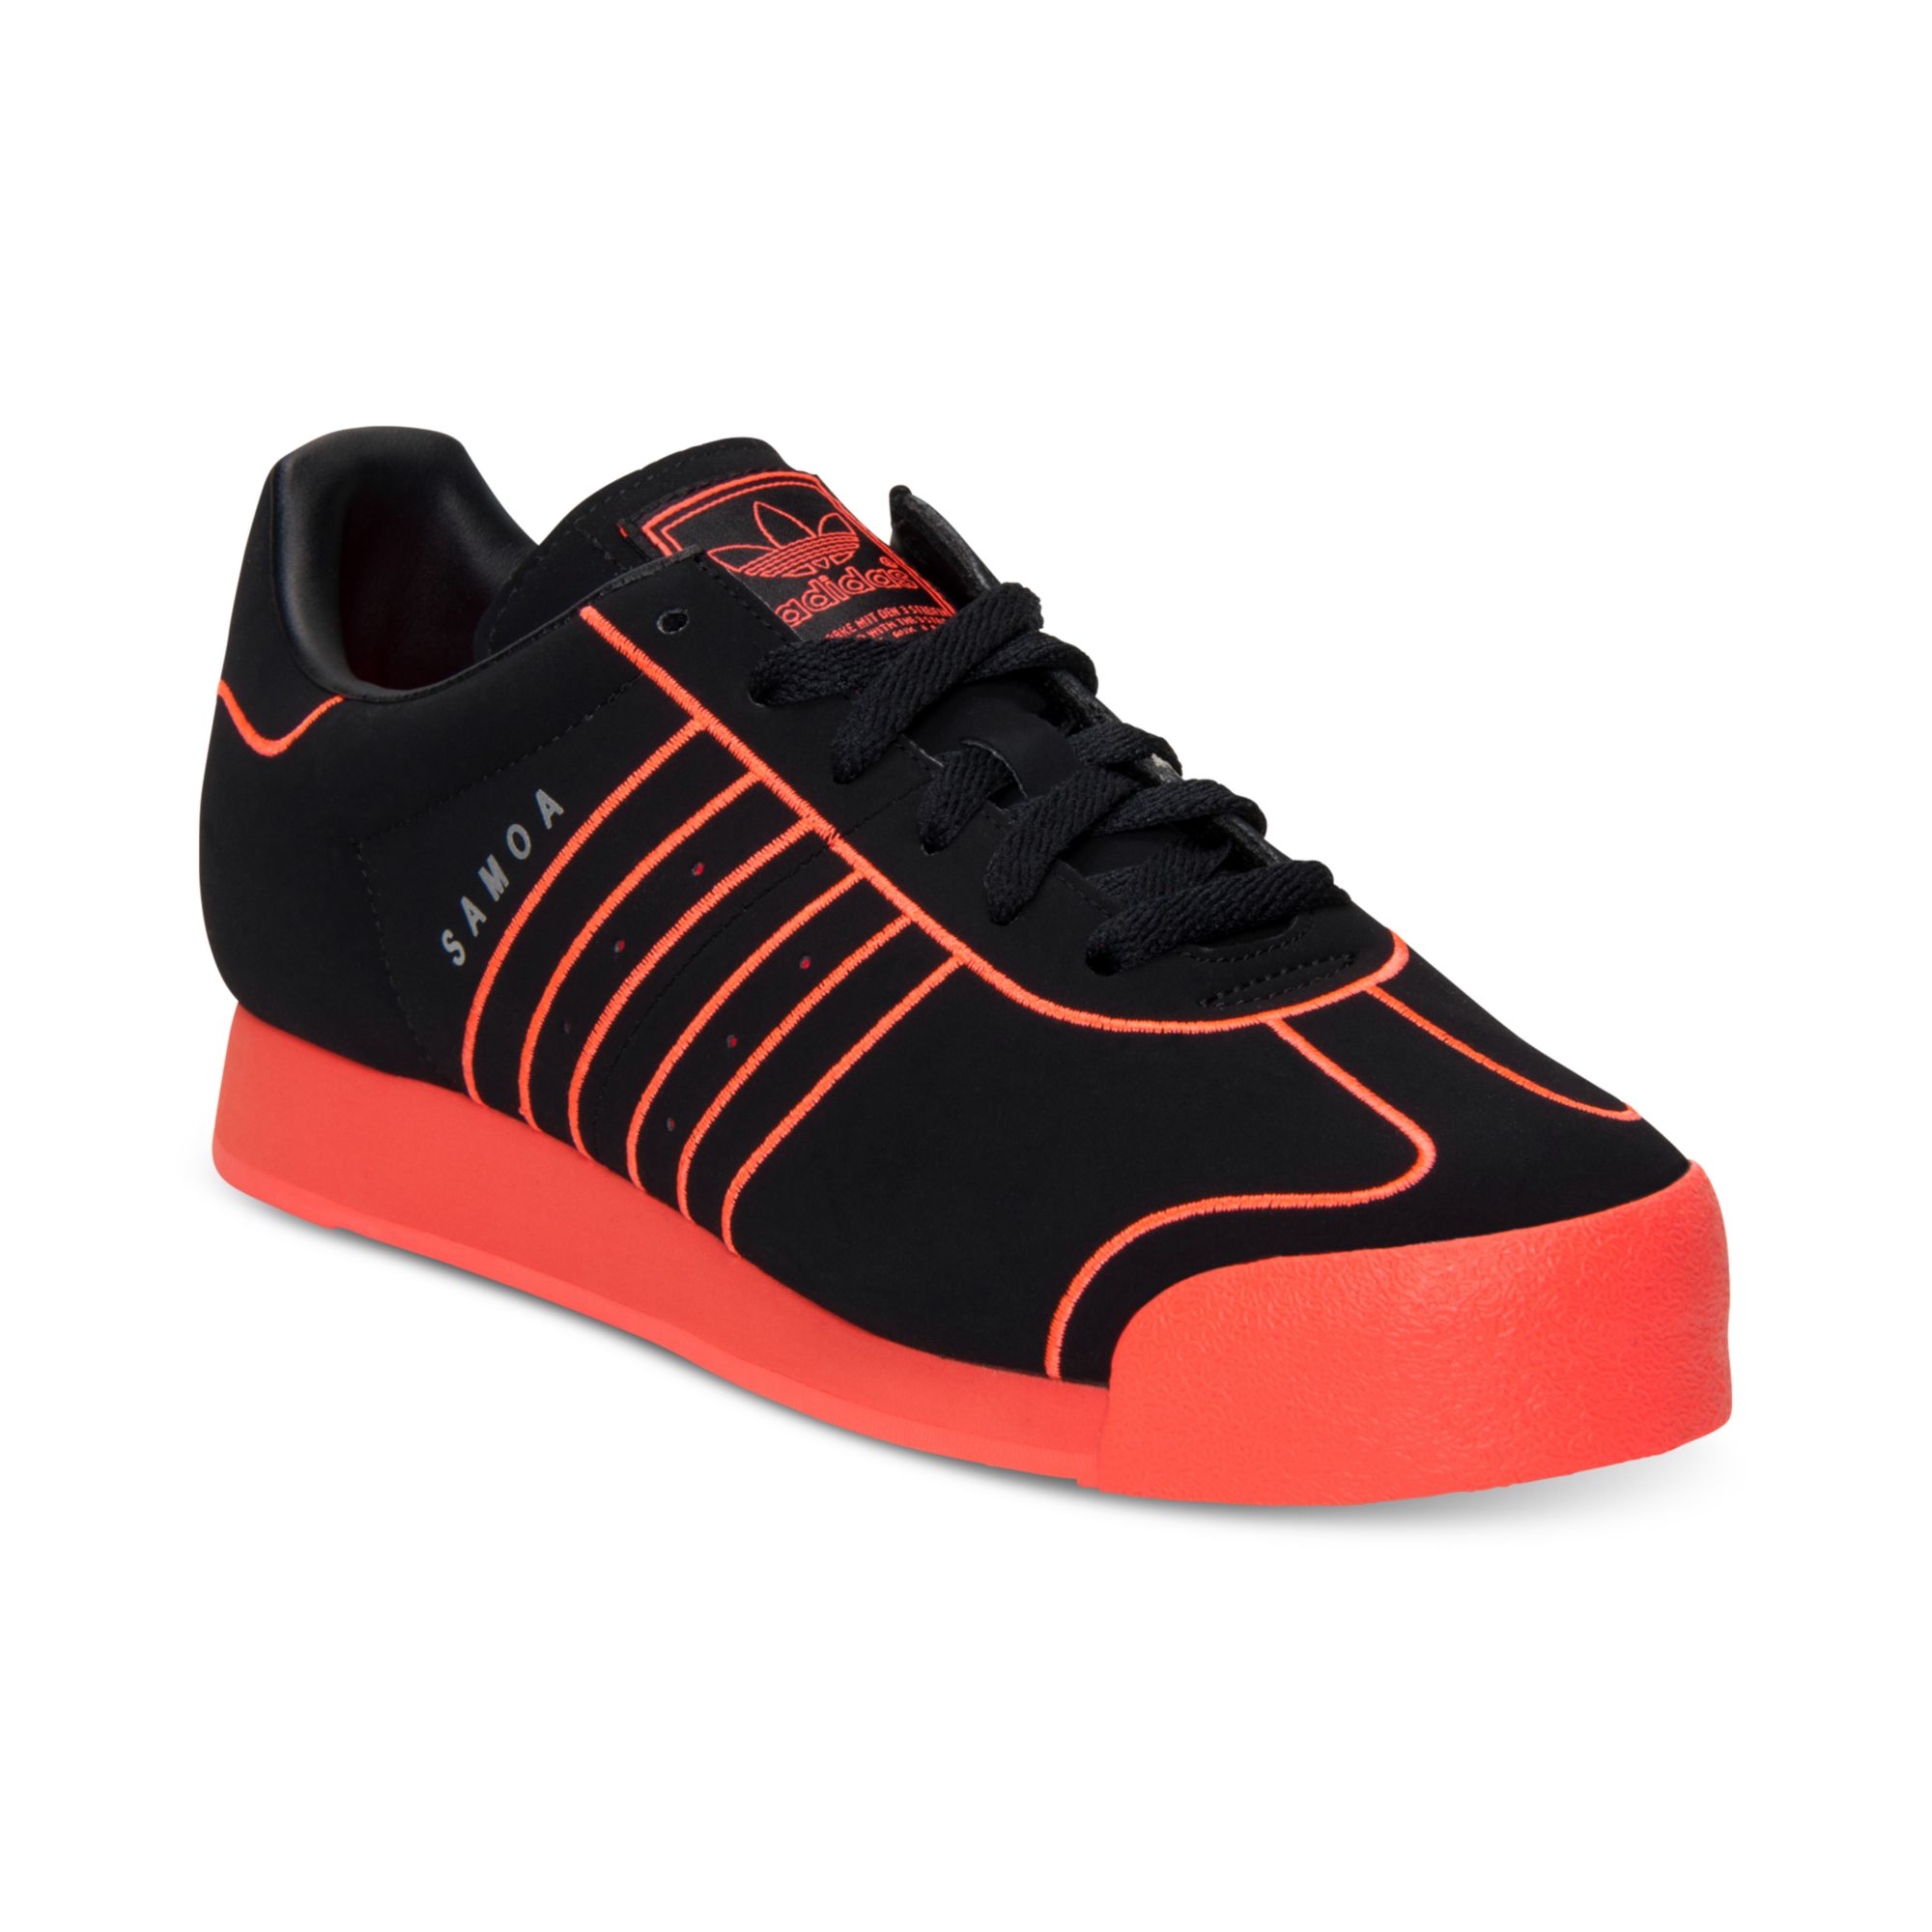 Lyst - Adidas Samoa Casual Sneakers in Black for Men